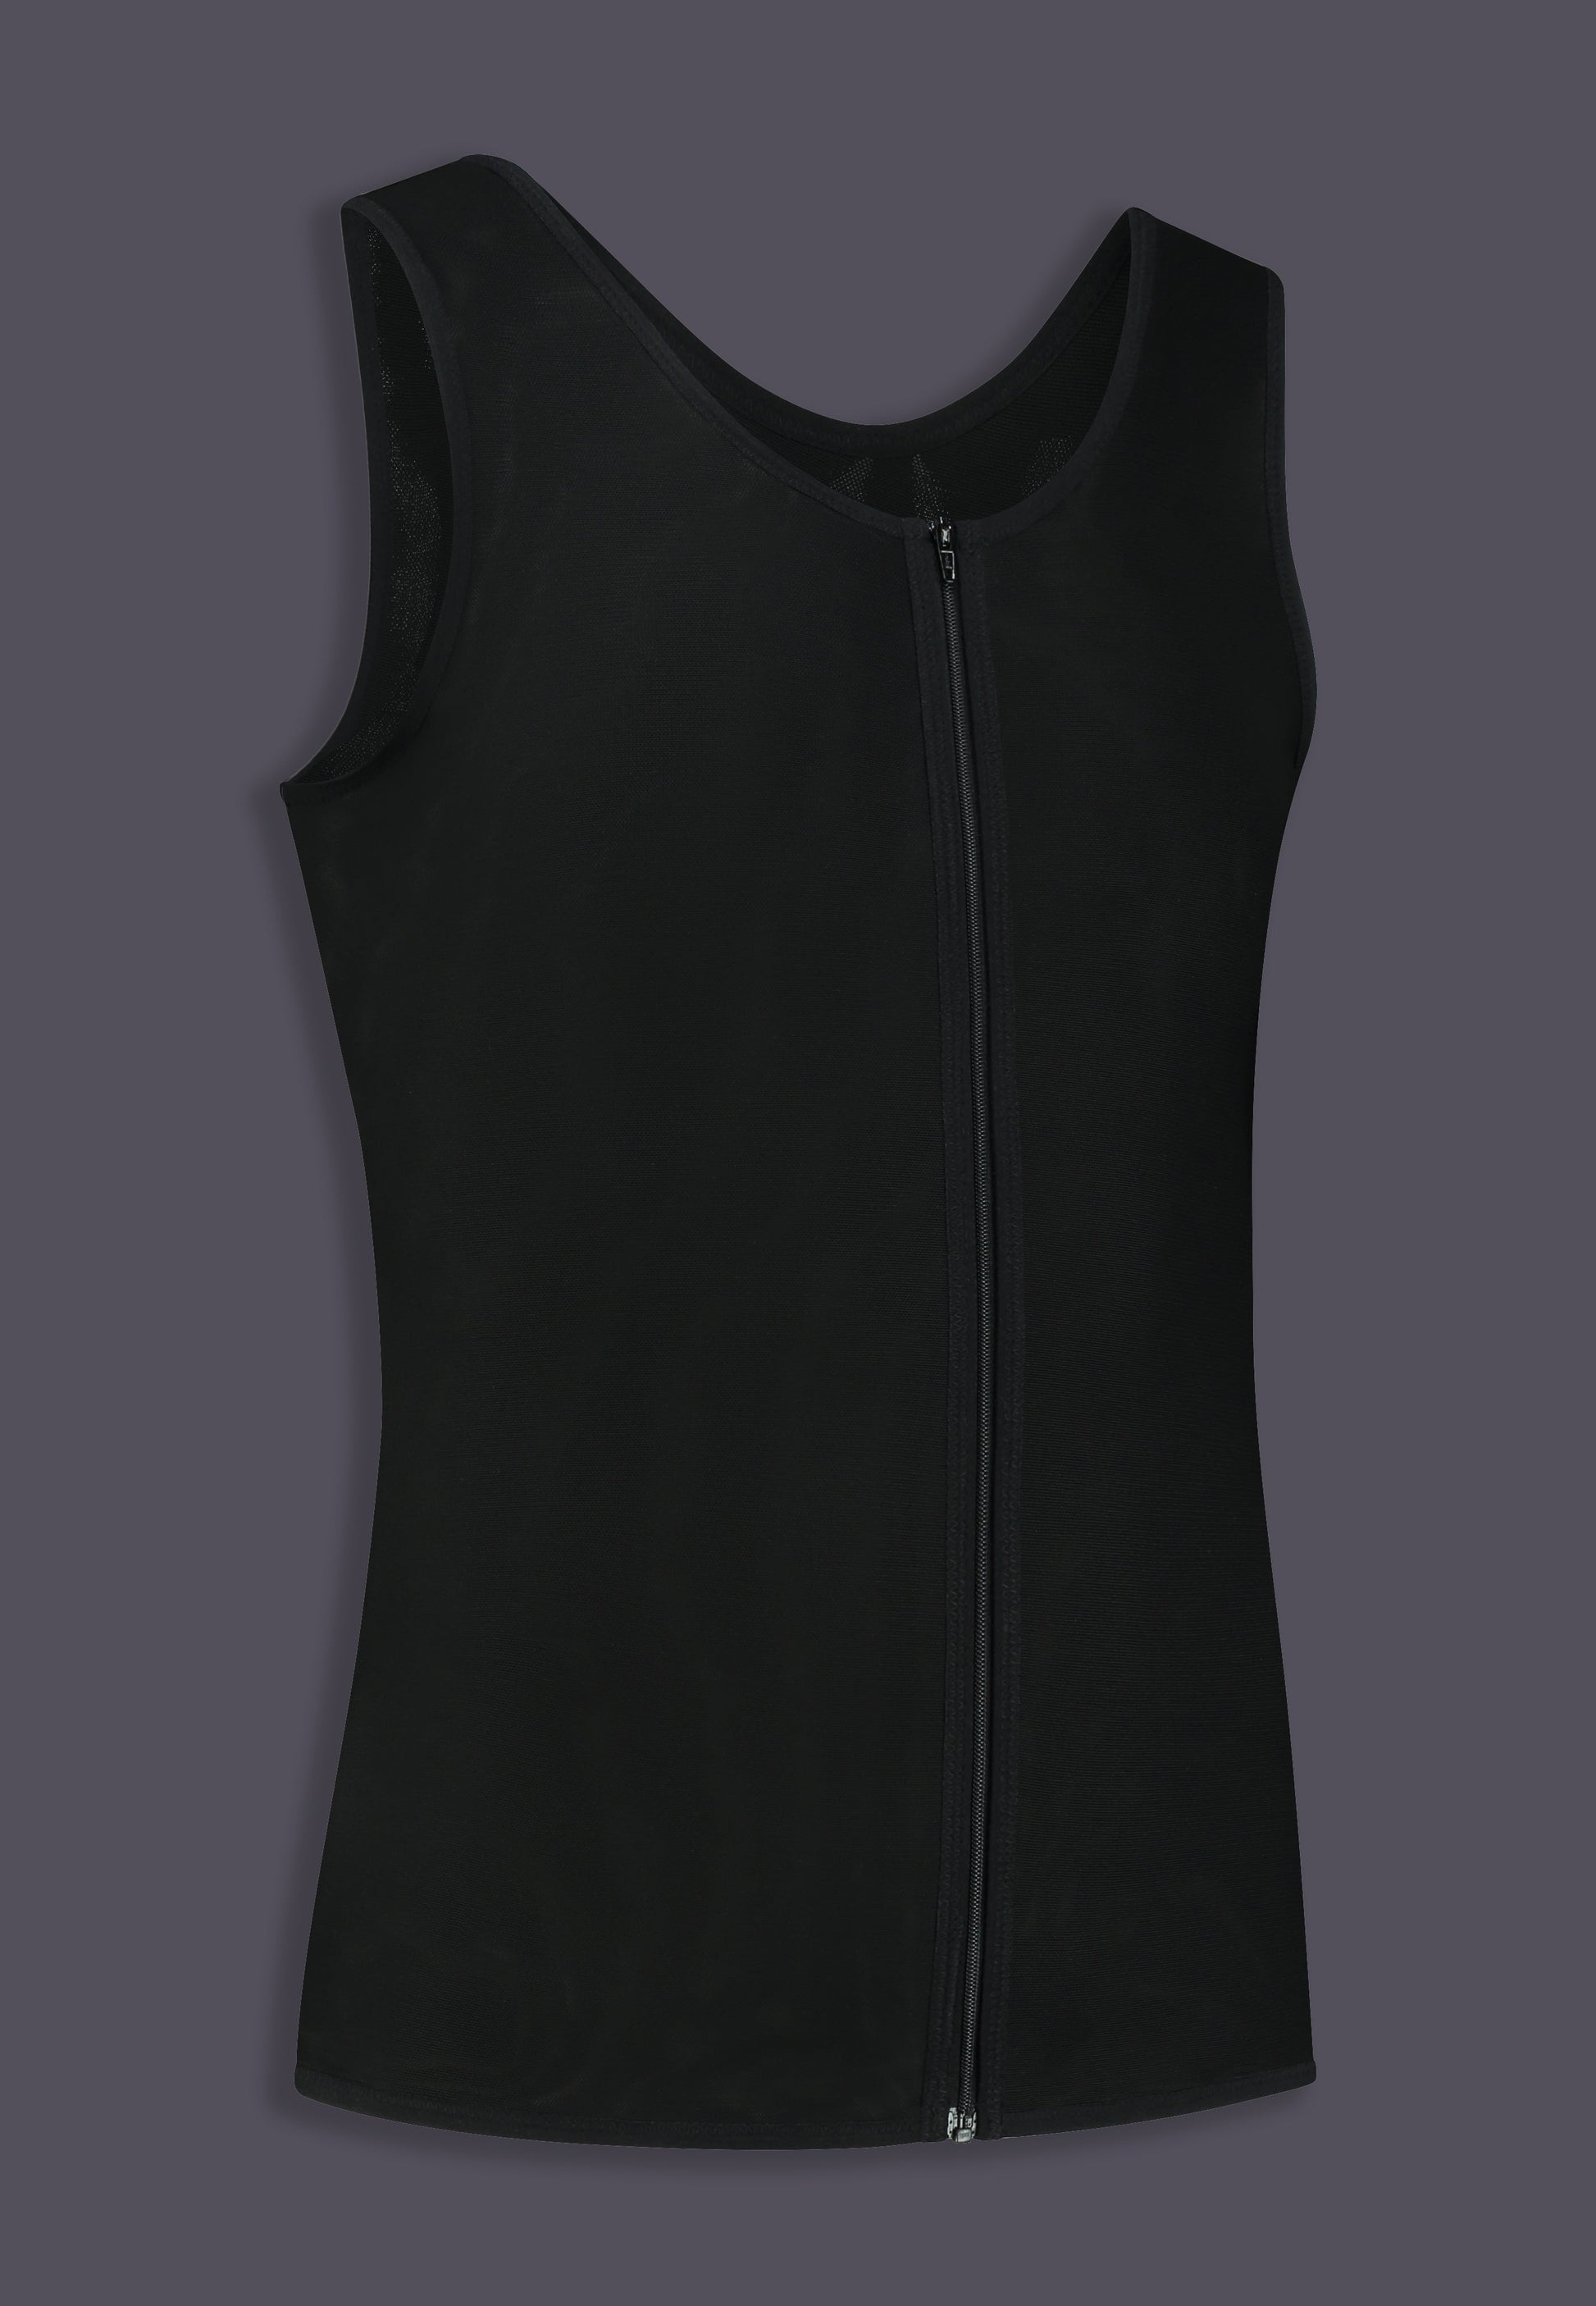 Singlet Binder with zipper in black side right view